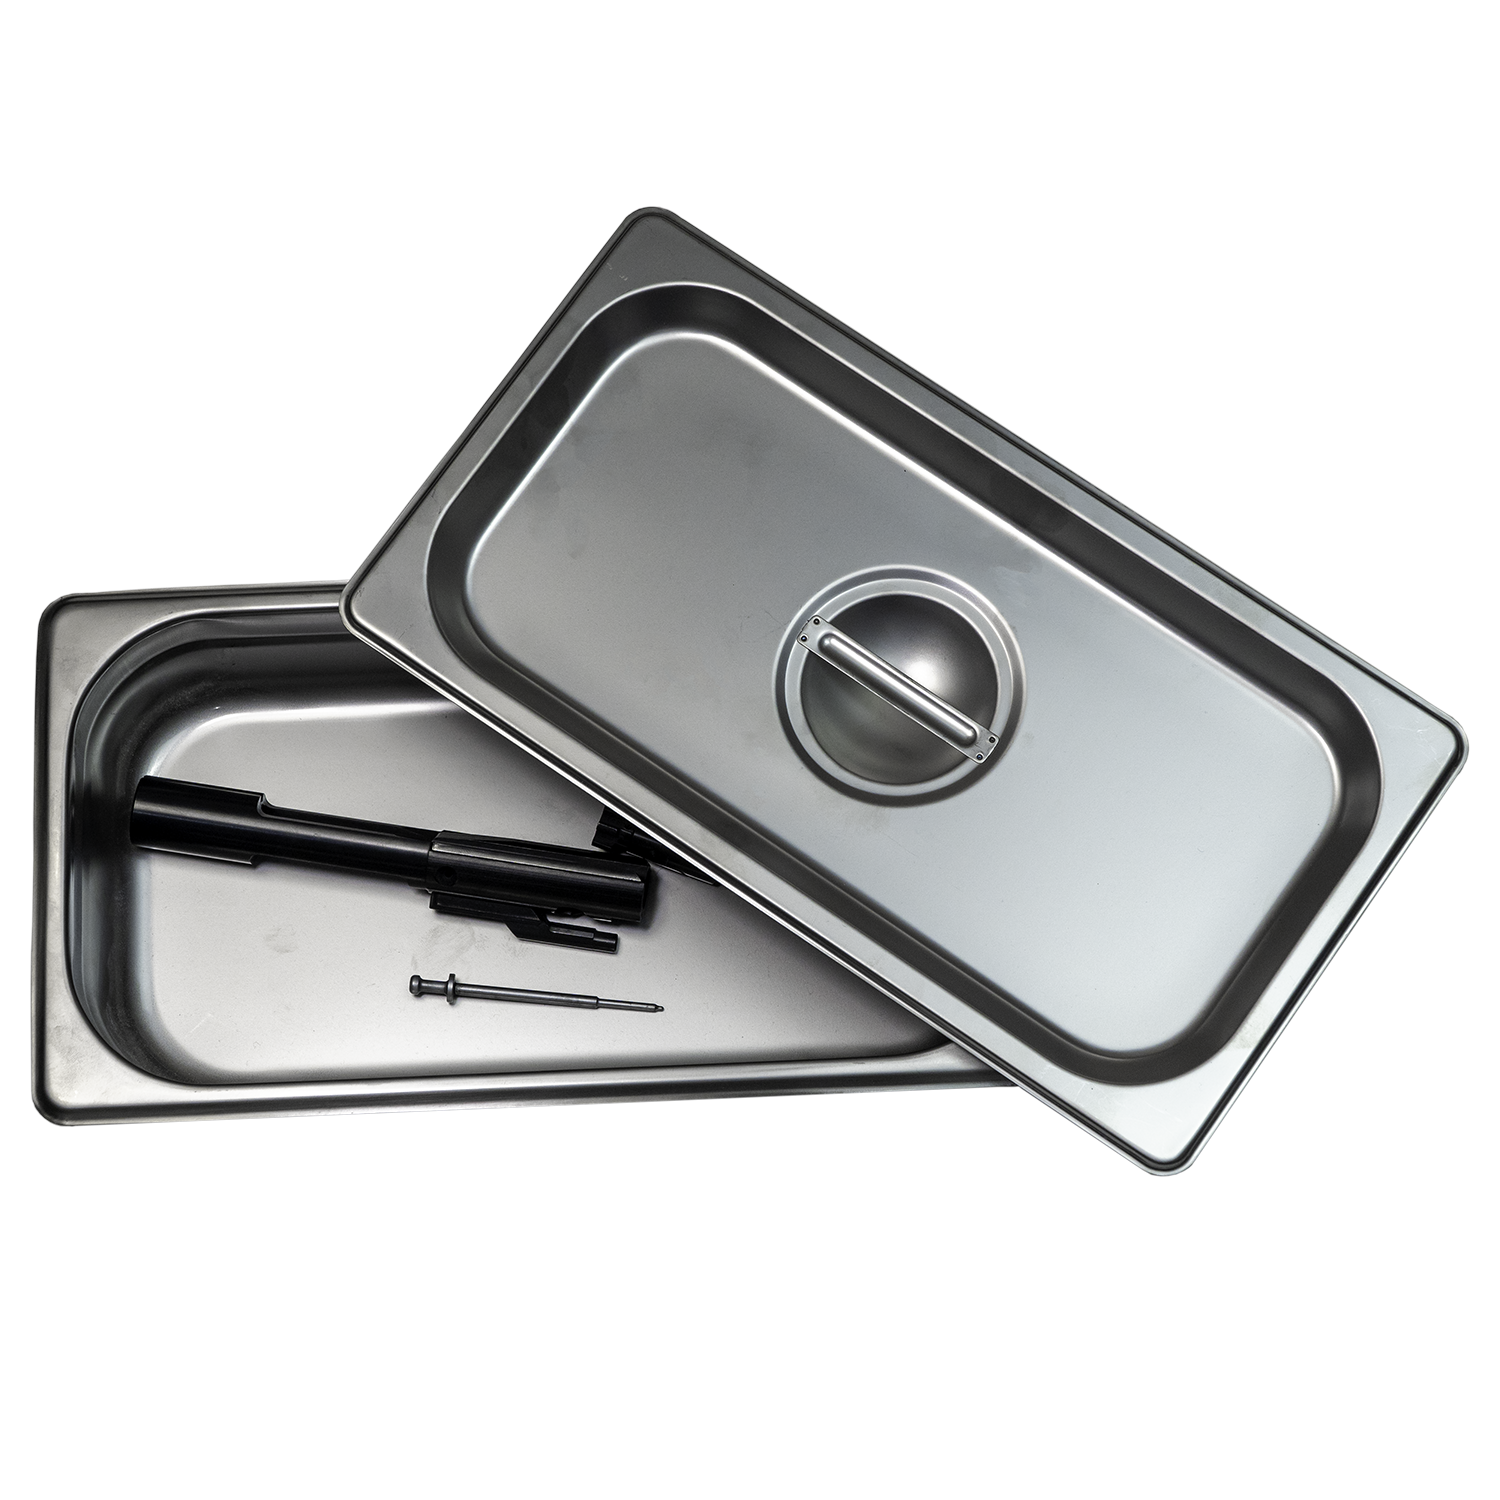 BACK IN STOCK - Stainless Steel Tray